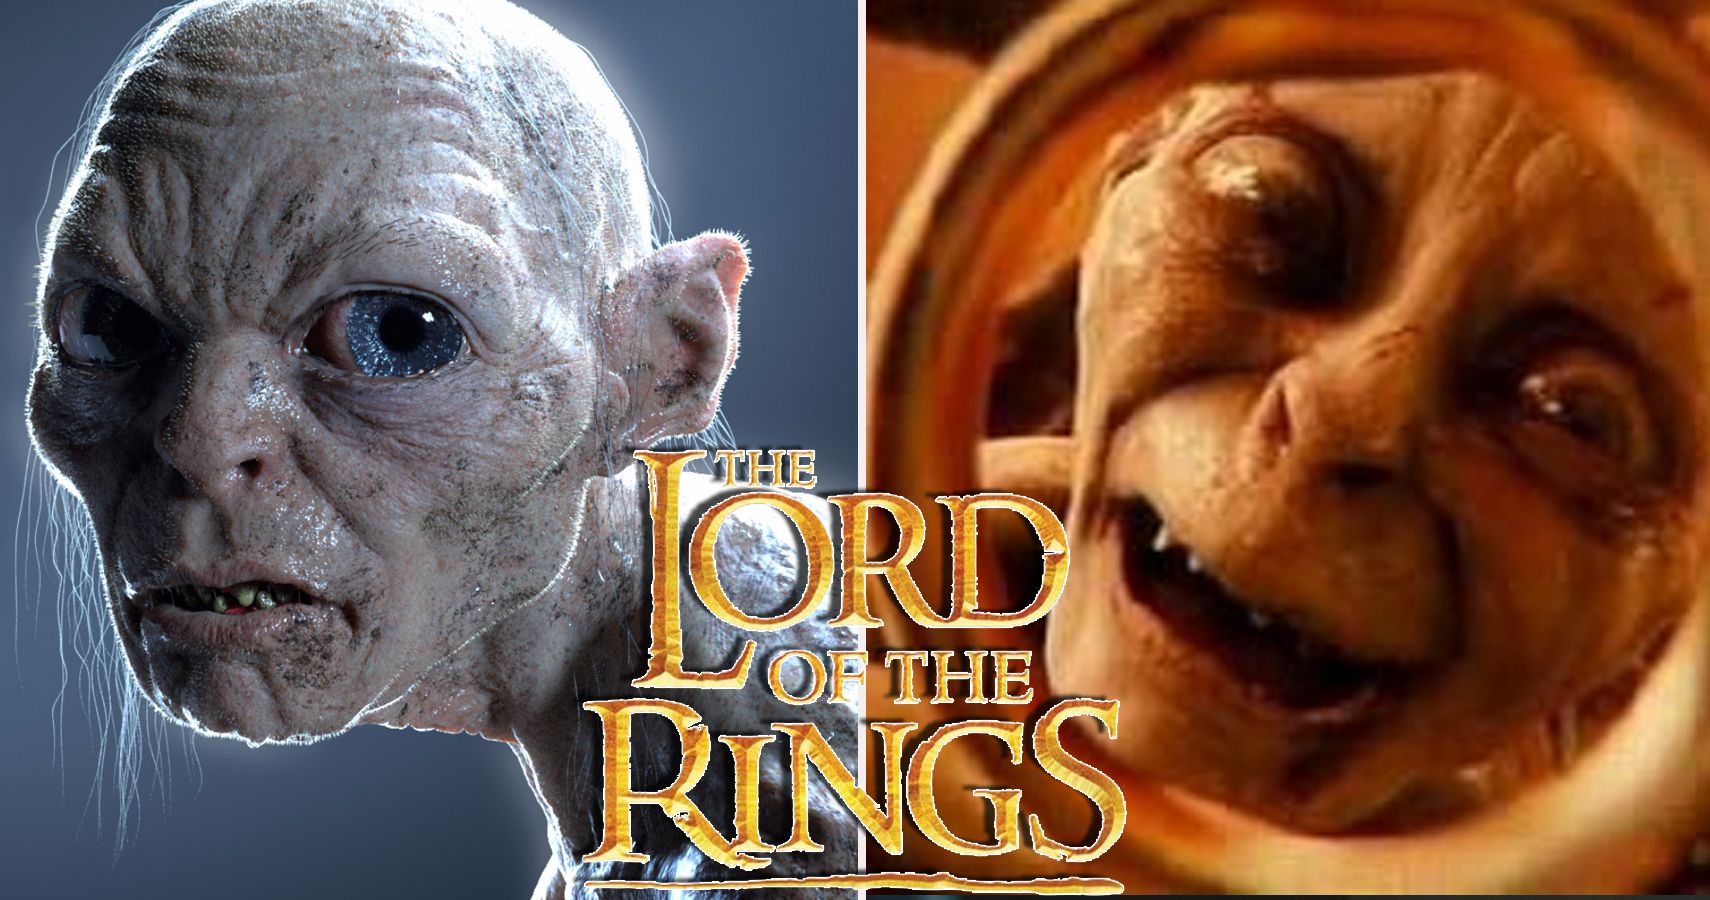 I've Seen The Lord of the Rings: Gollum and I'm Not Sure It Knows What It Is